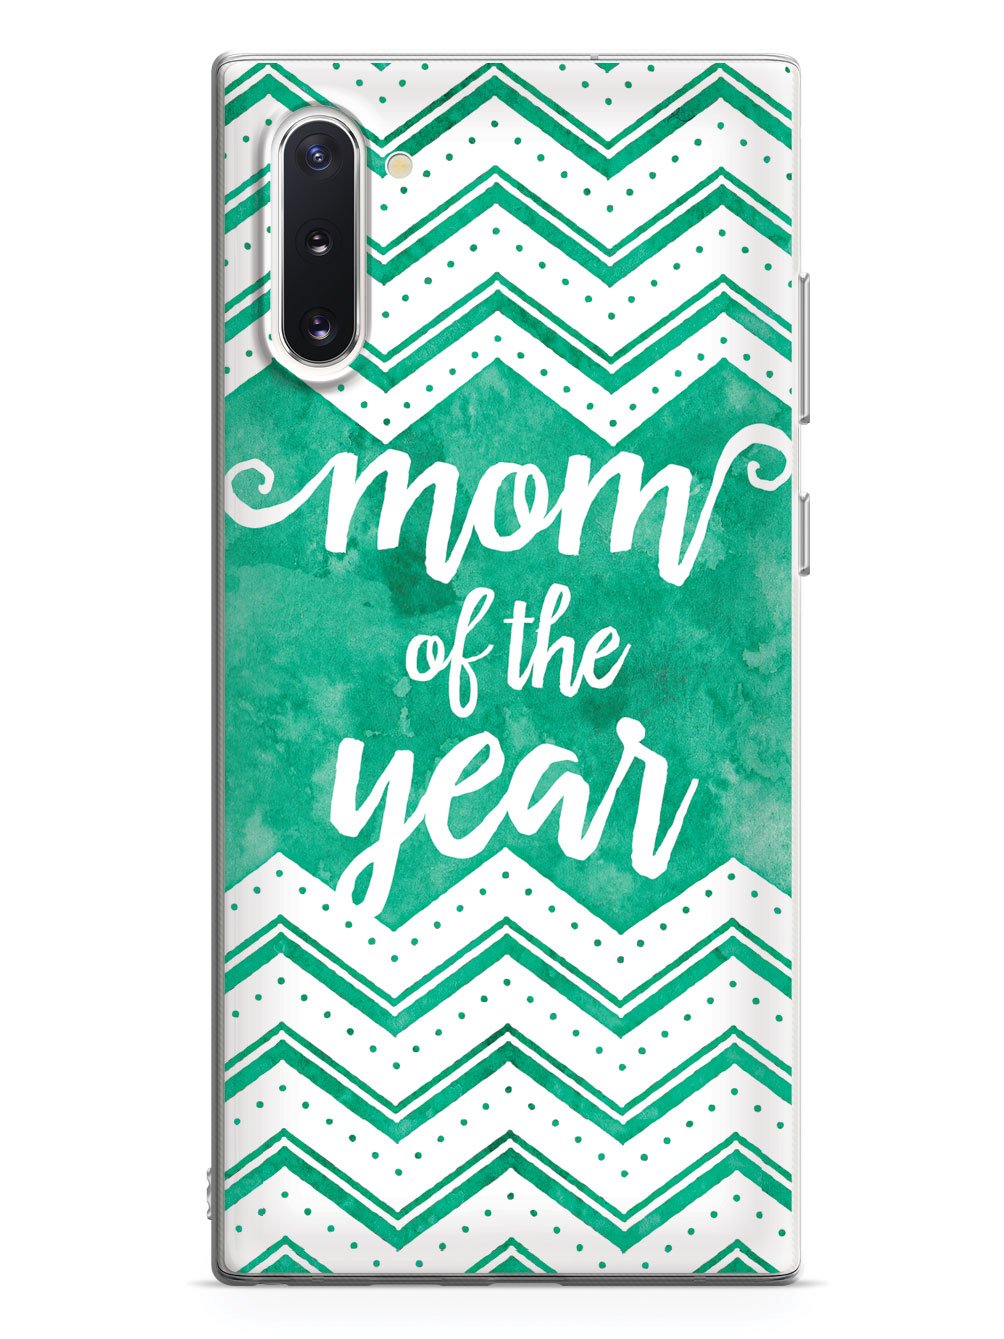 Mom of the Year - Green Case